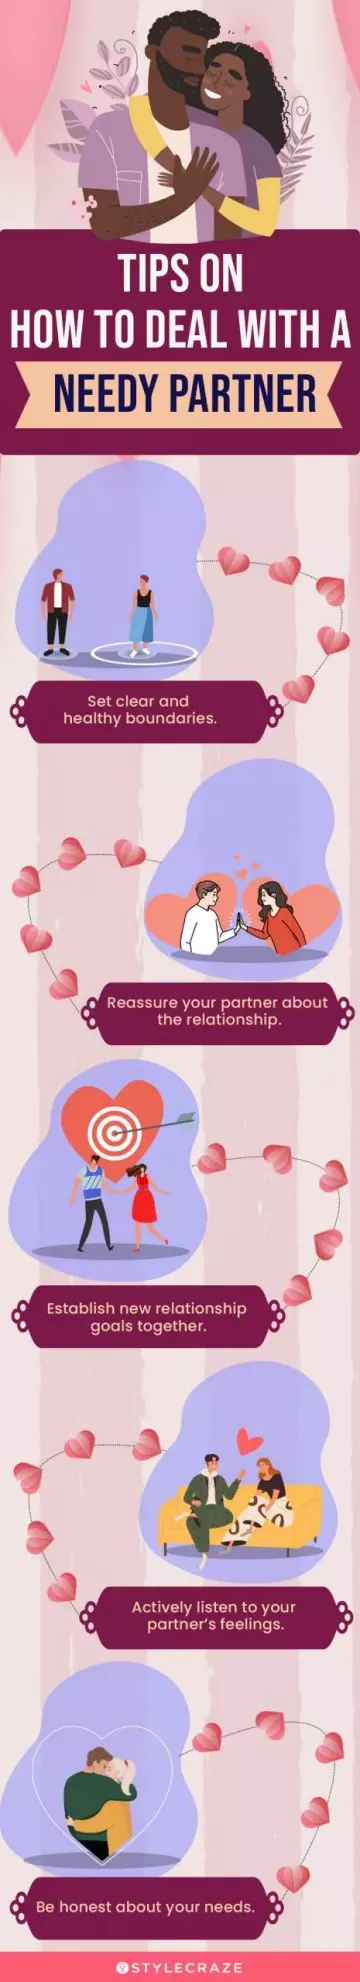 tips on how to deal with a needy partner (infographic)